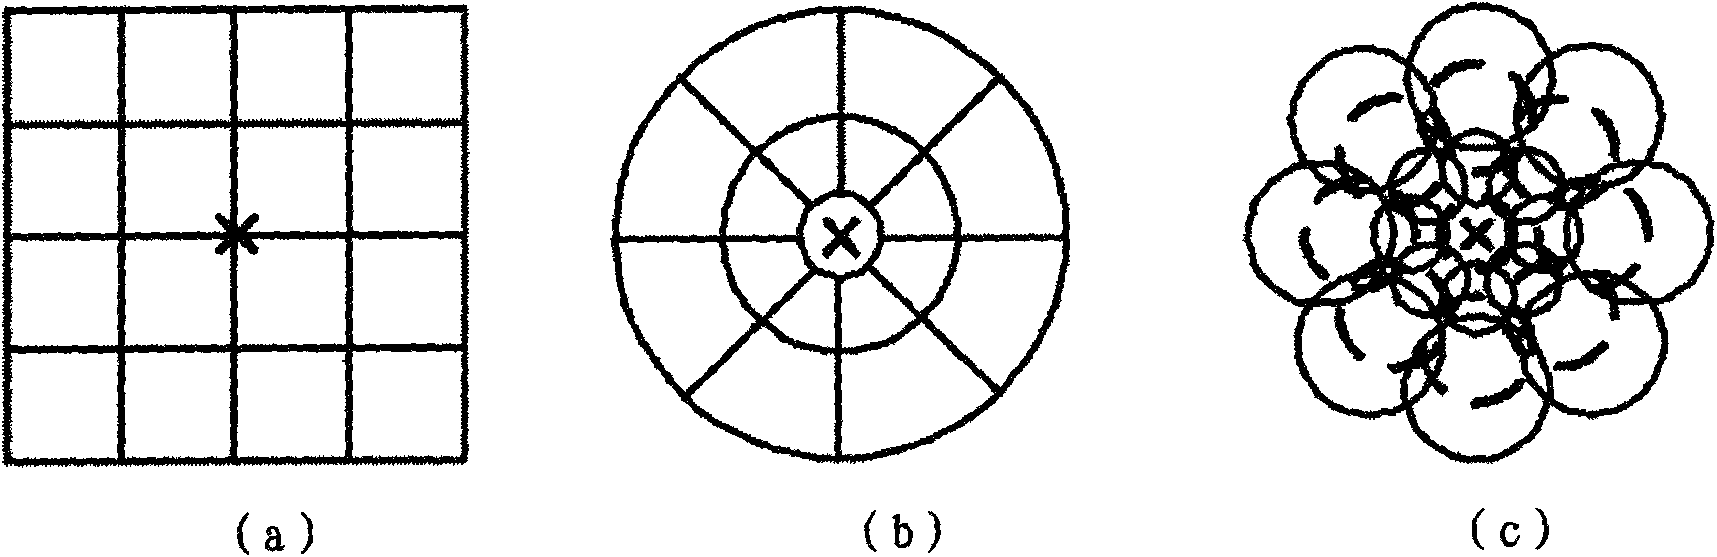 Method for extracting and describing DAISY-based feature with mirror face turning invariance